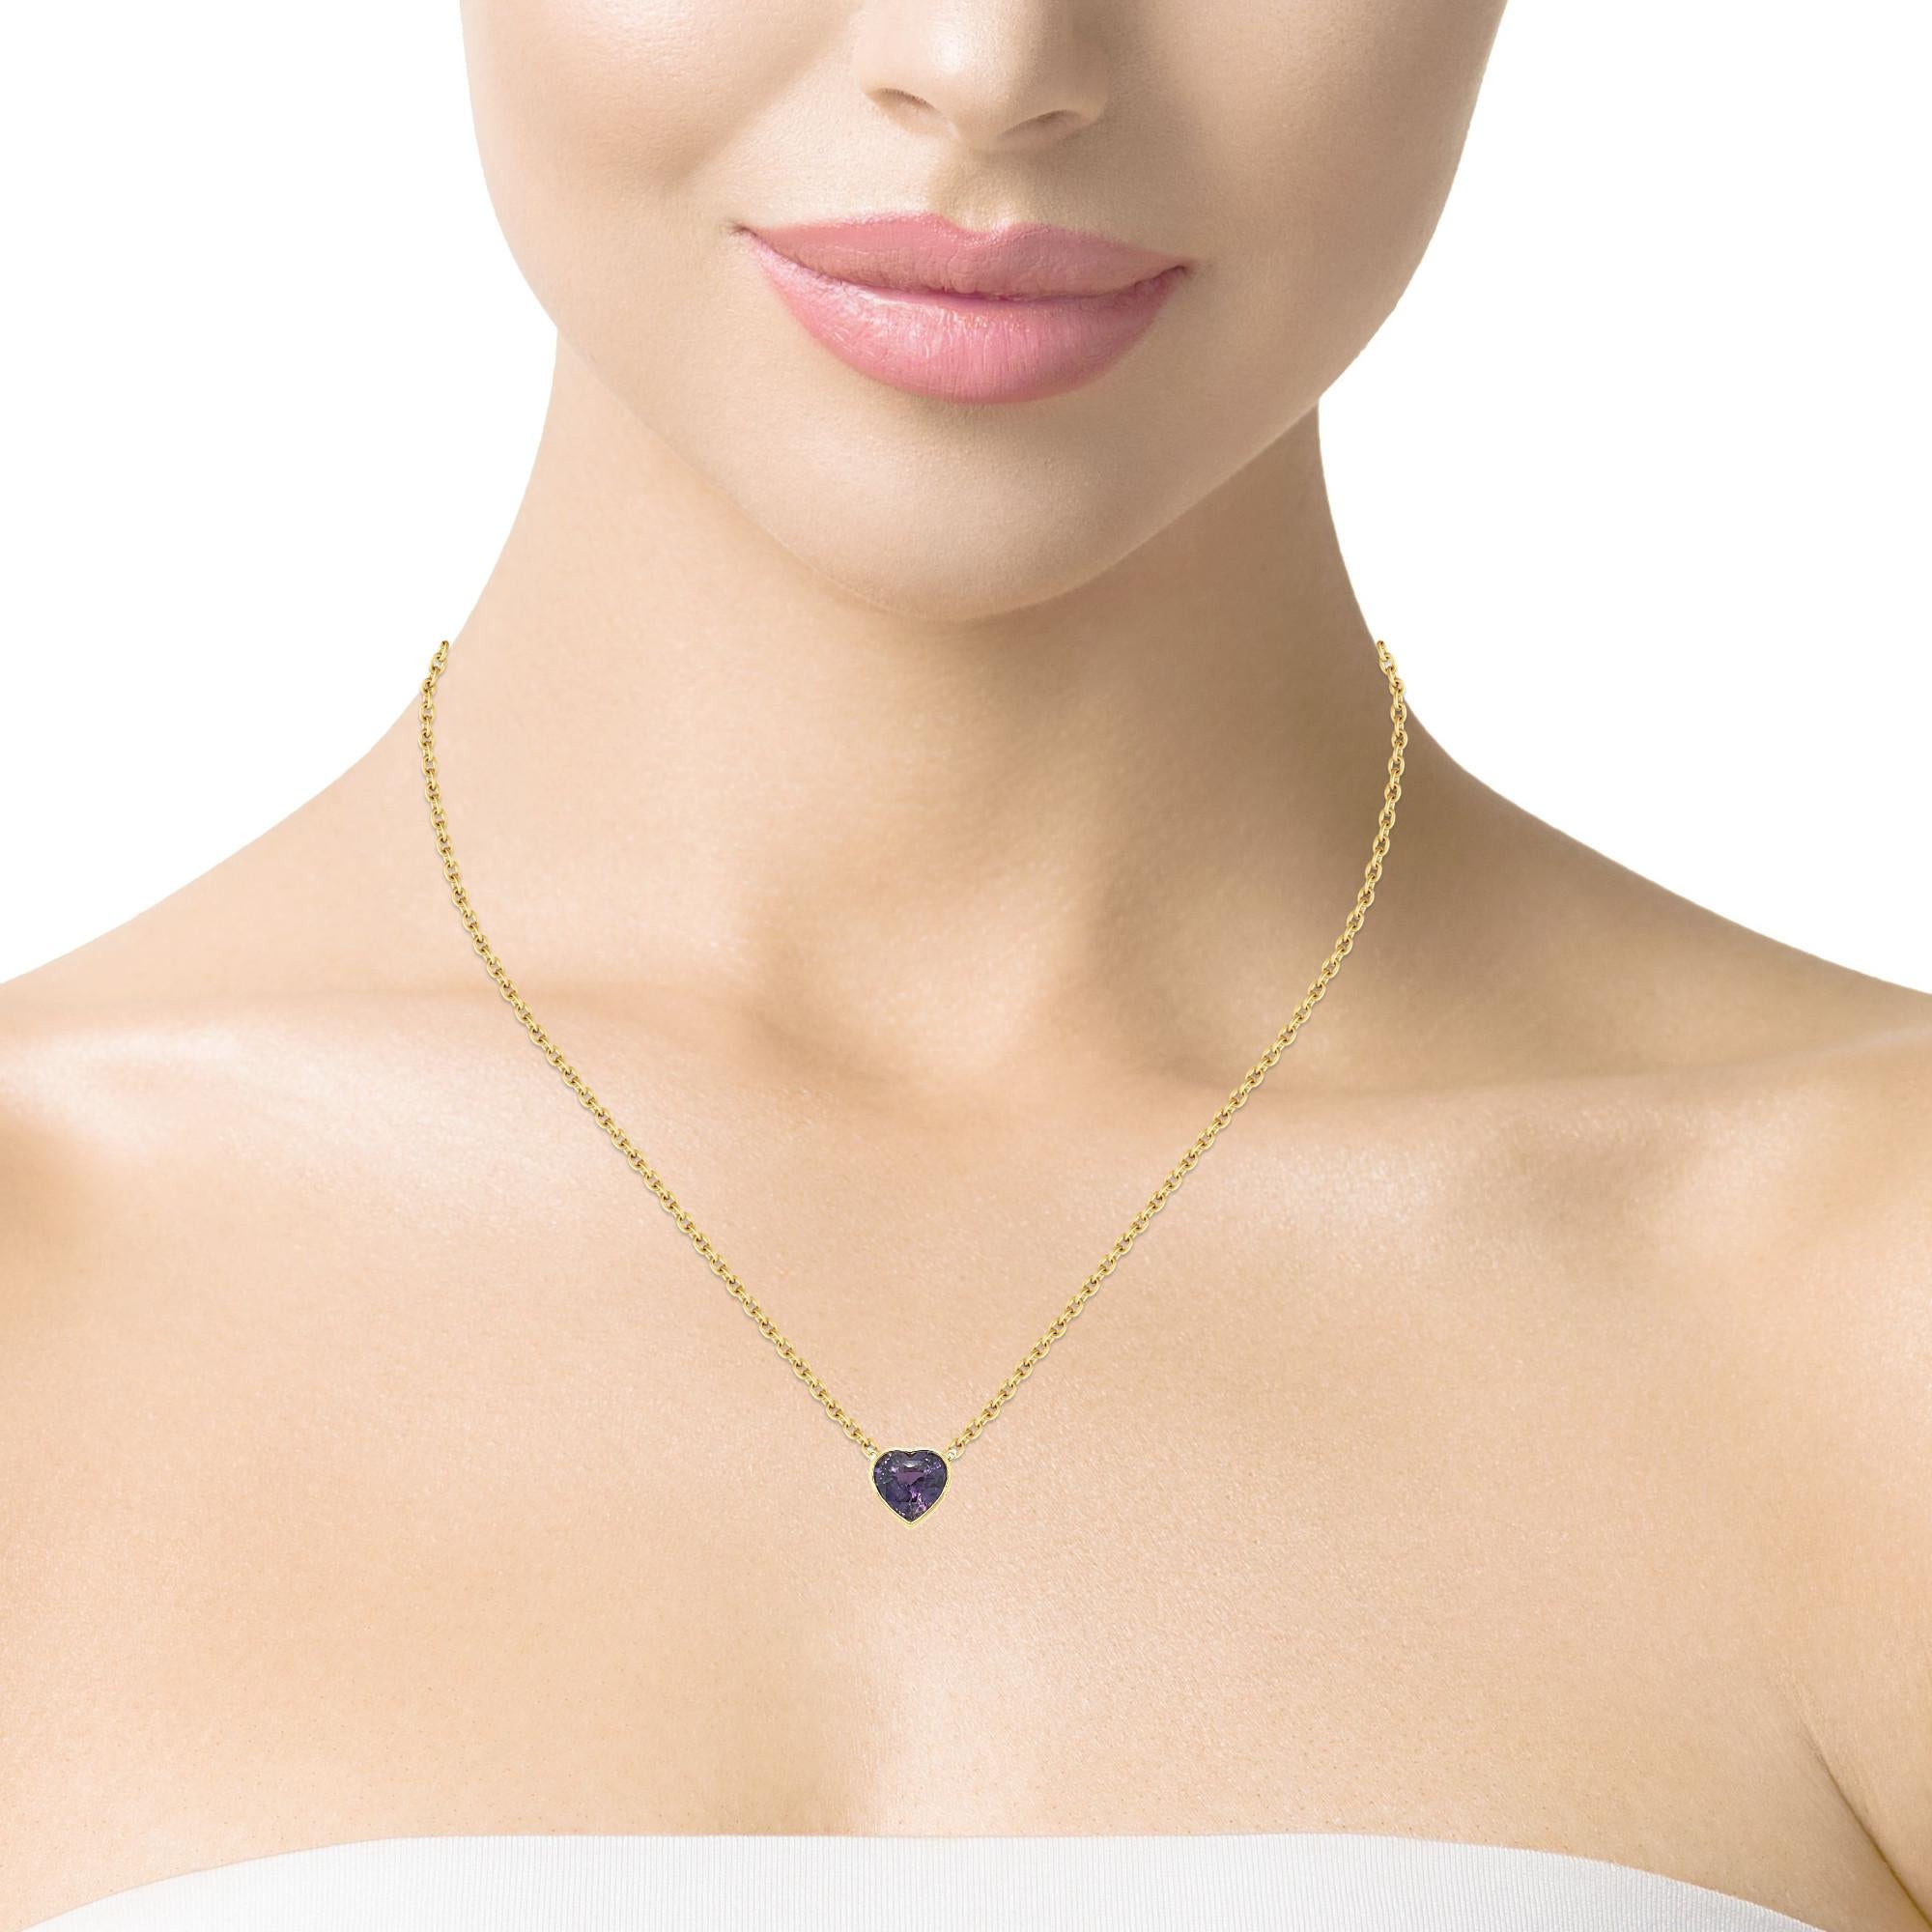 GIA Certified Unheated 3.56 Carat Purple Sapphire Heart Necklace in 18k Gold For Sale 3